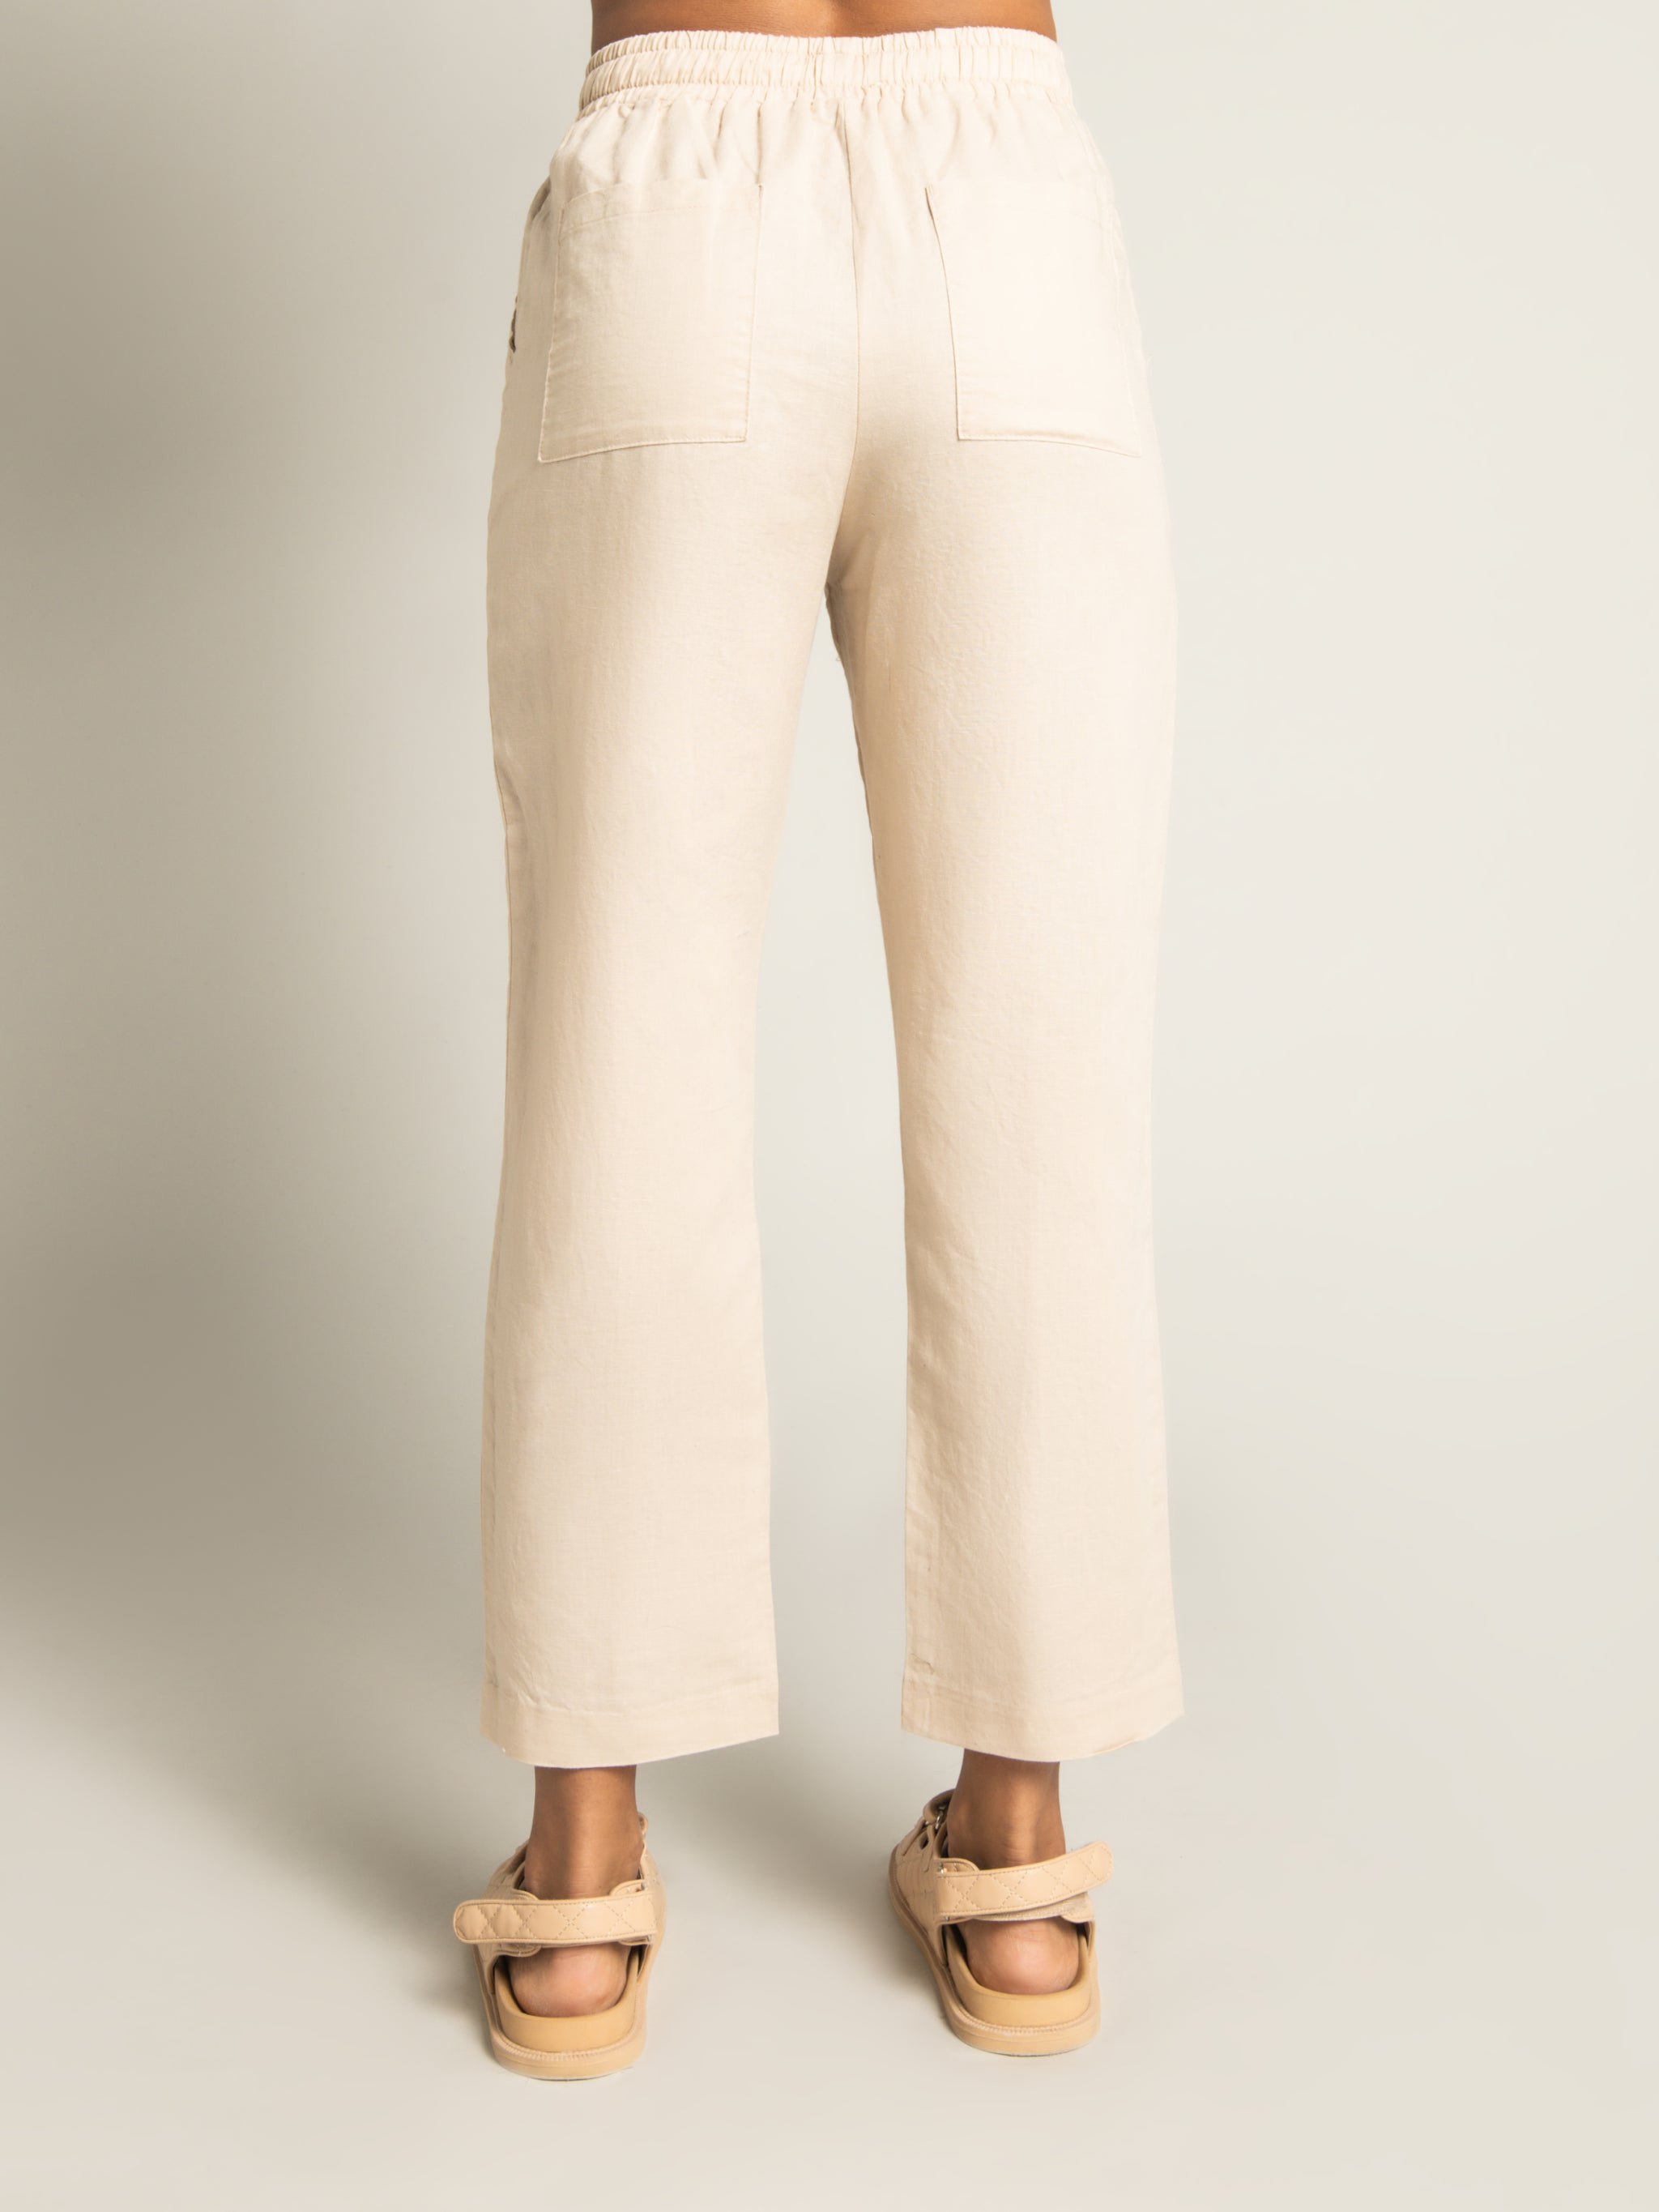 Classic Linen Pants in Sand - Glue Store